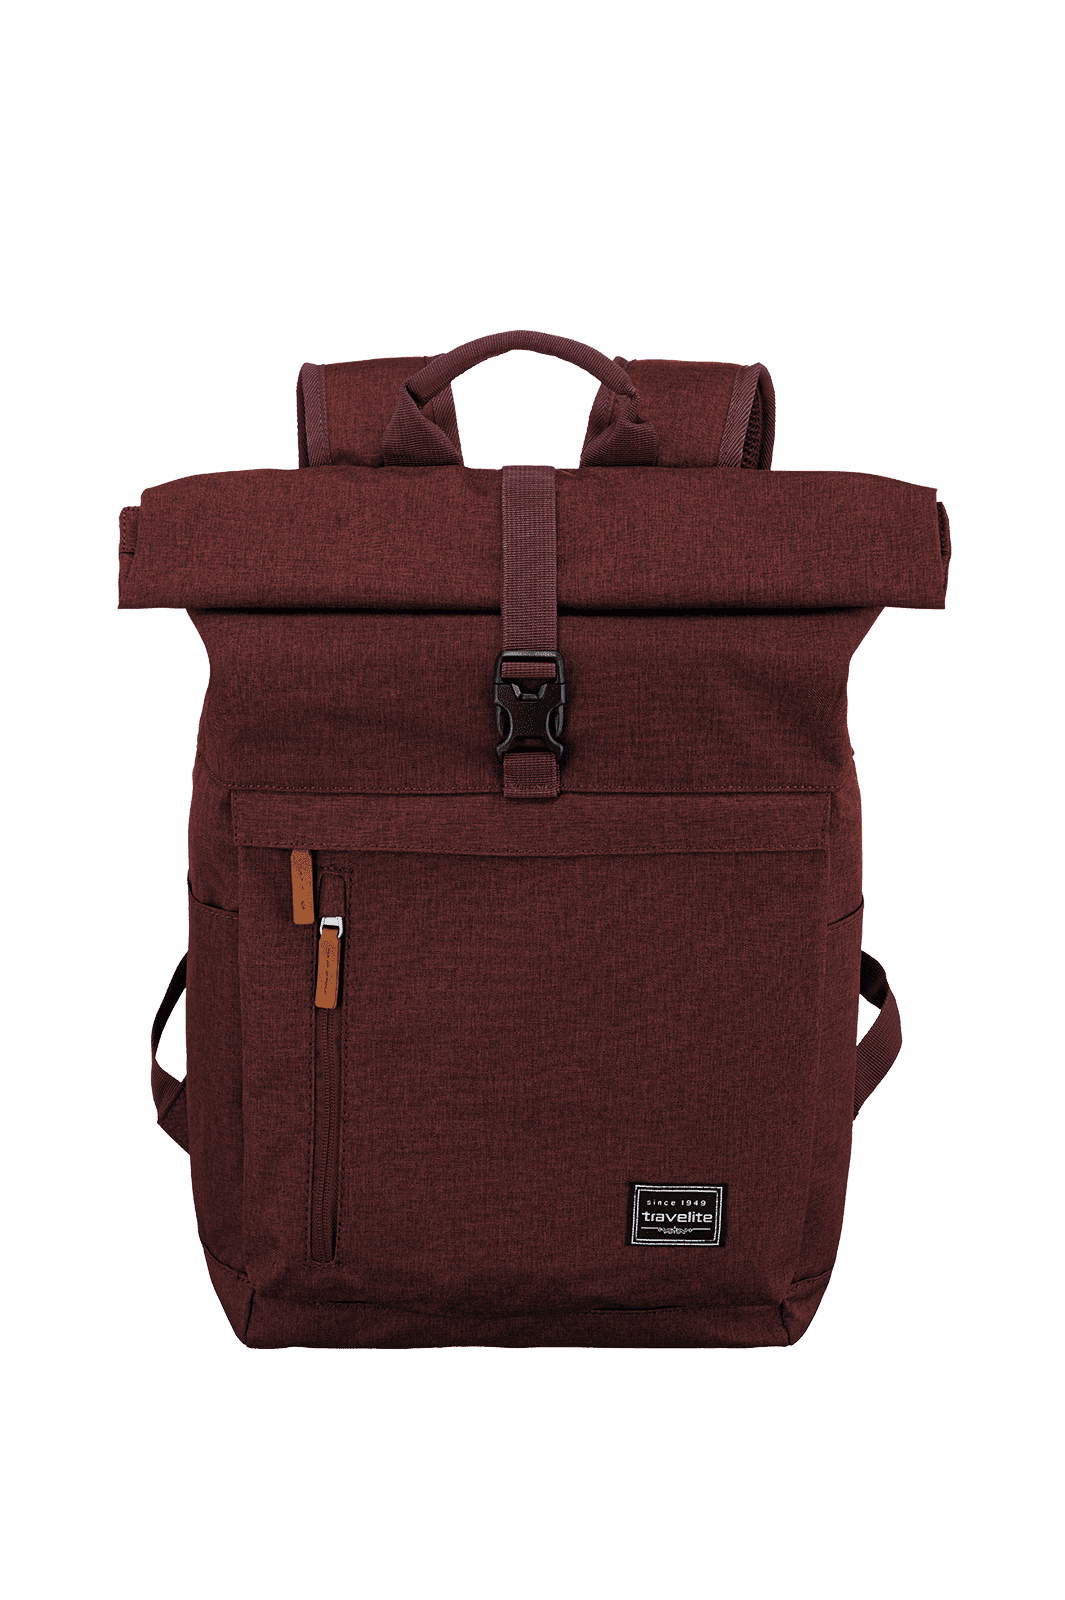 Rollup backpack